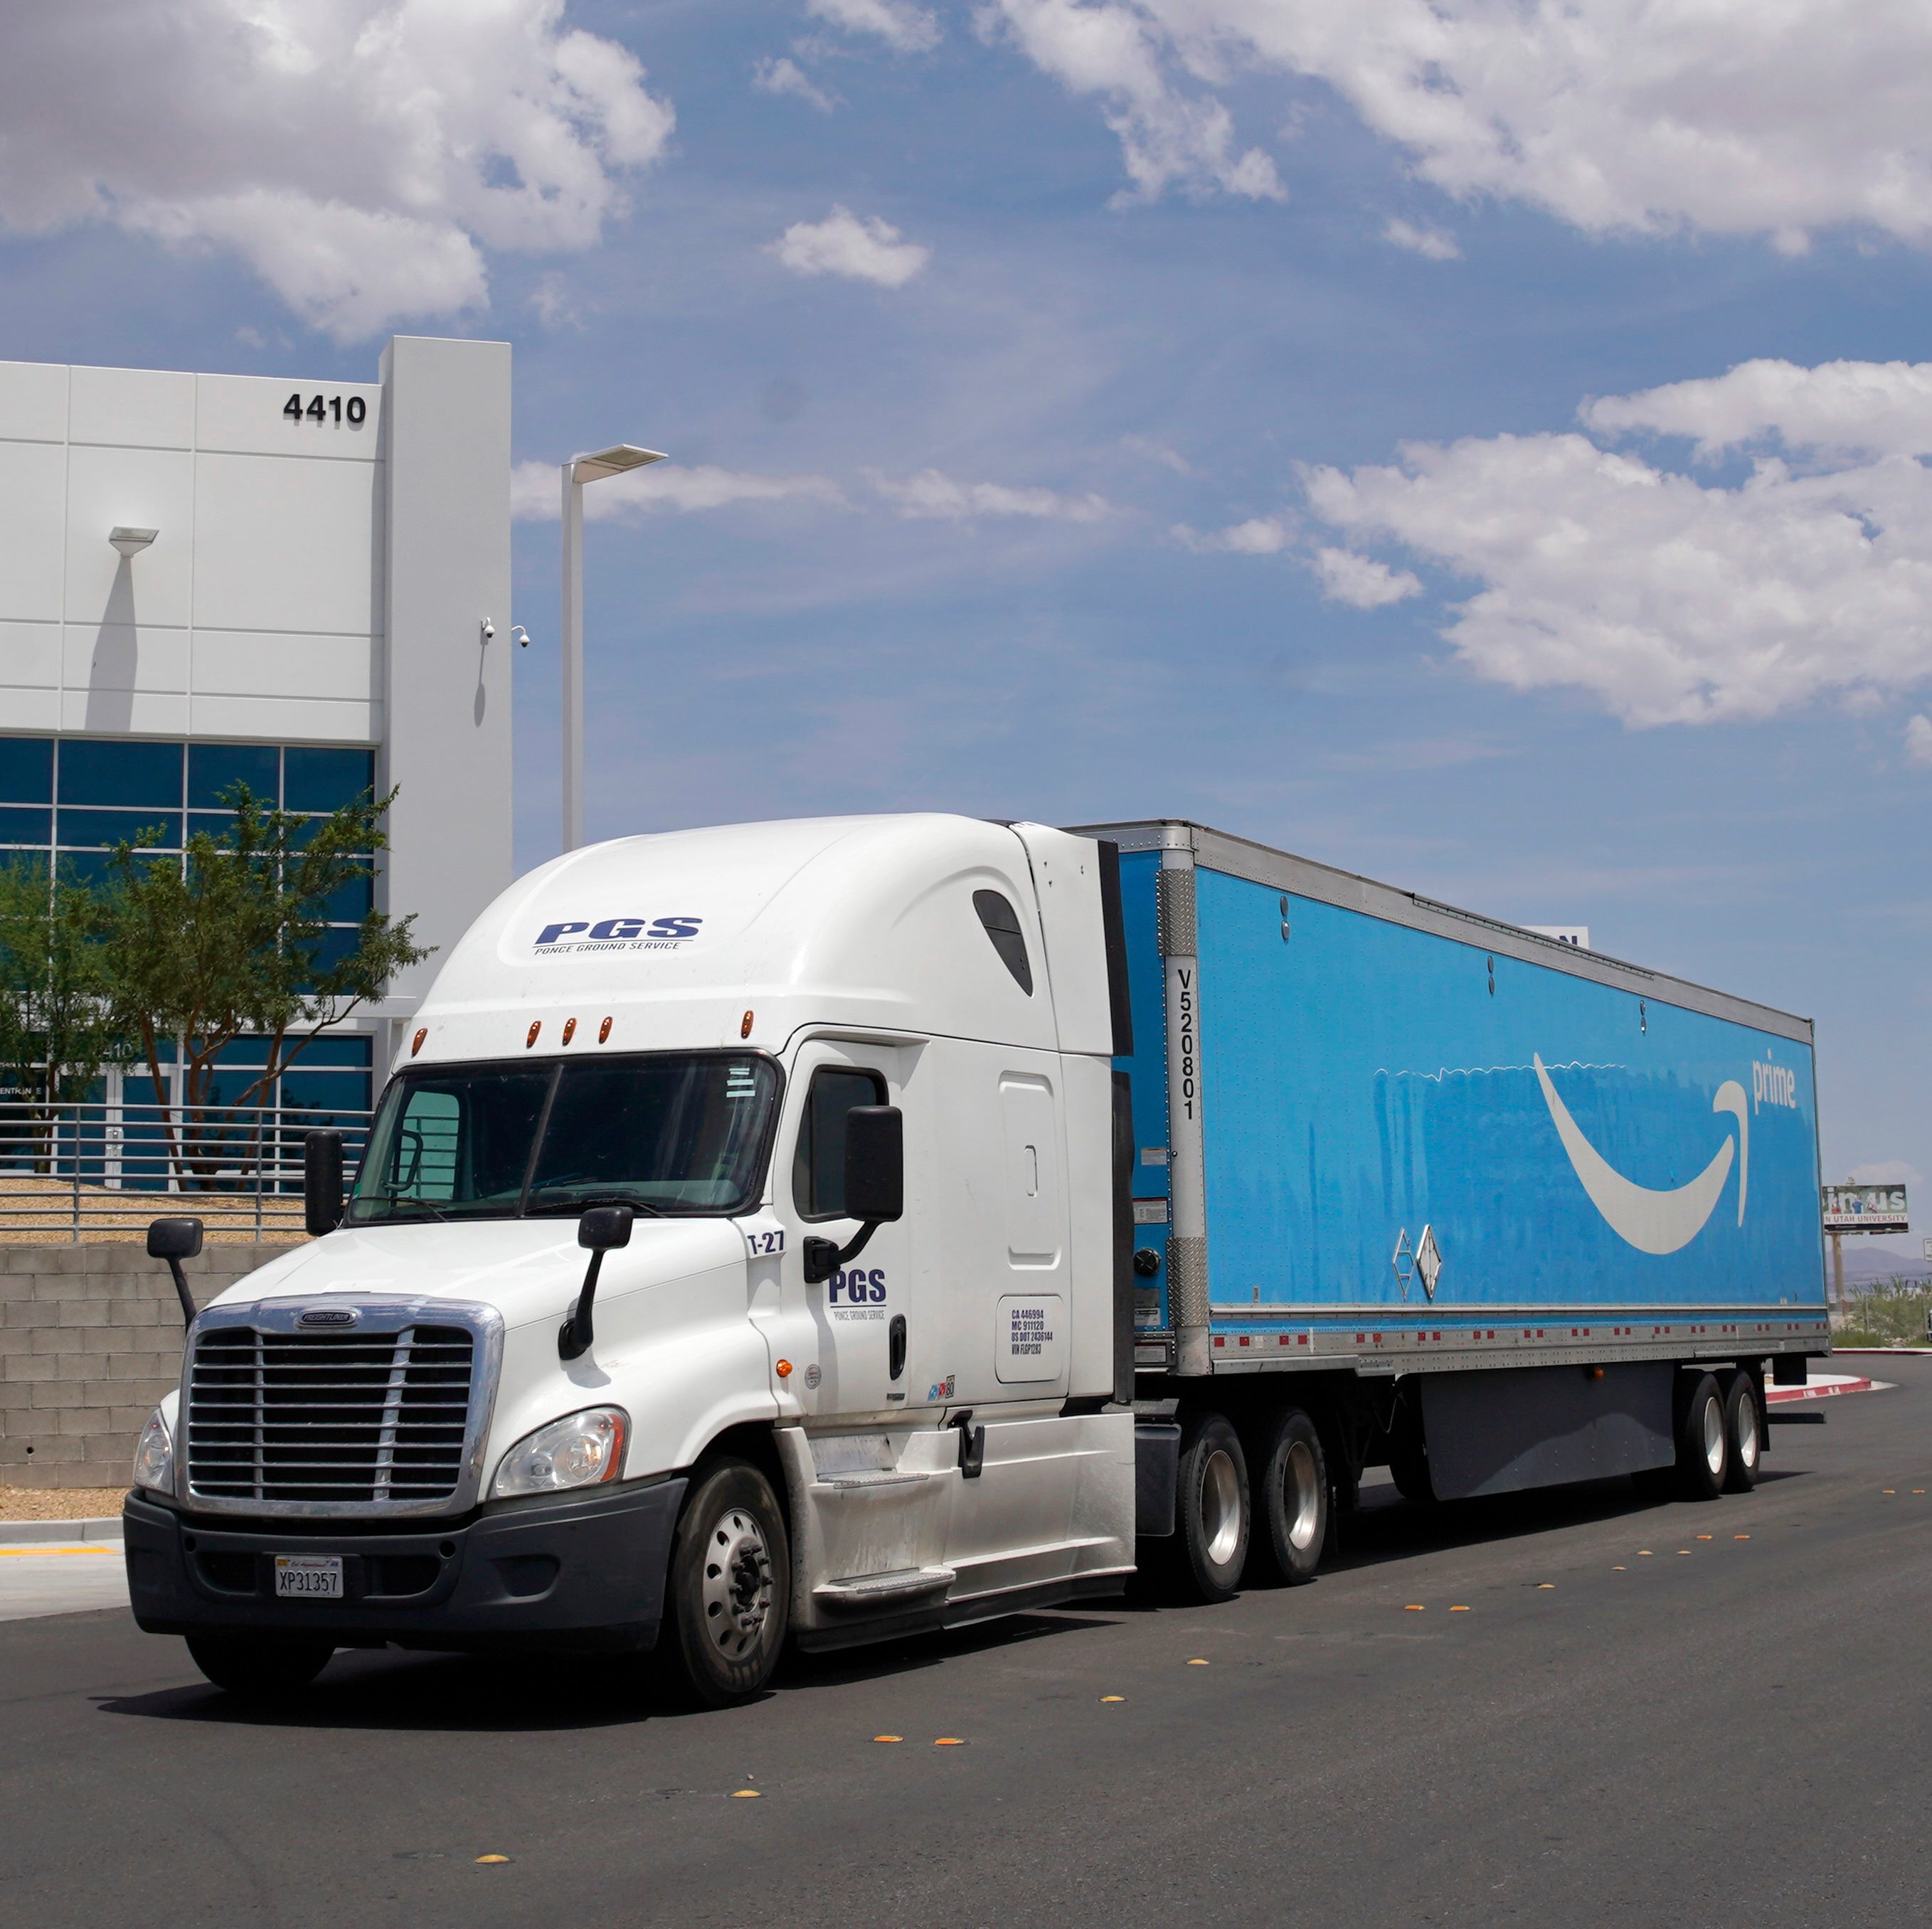 Amazon Distribution Center In Las Vegas Delivers To The Region